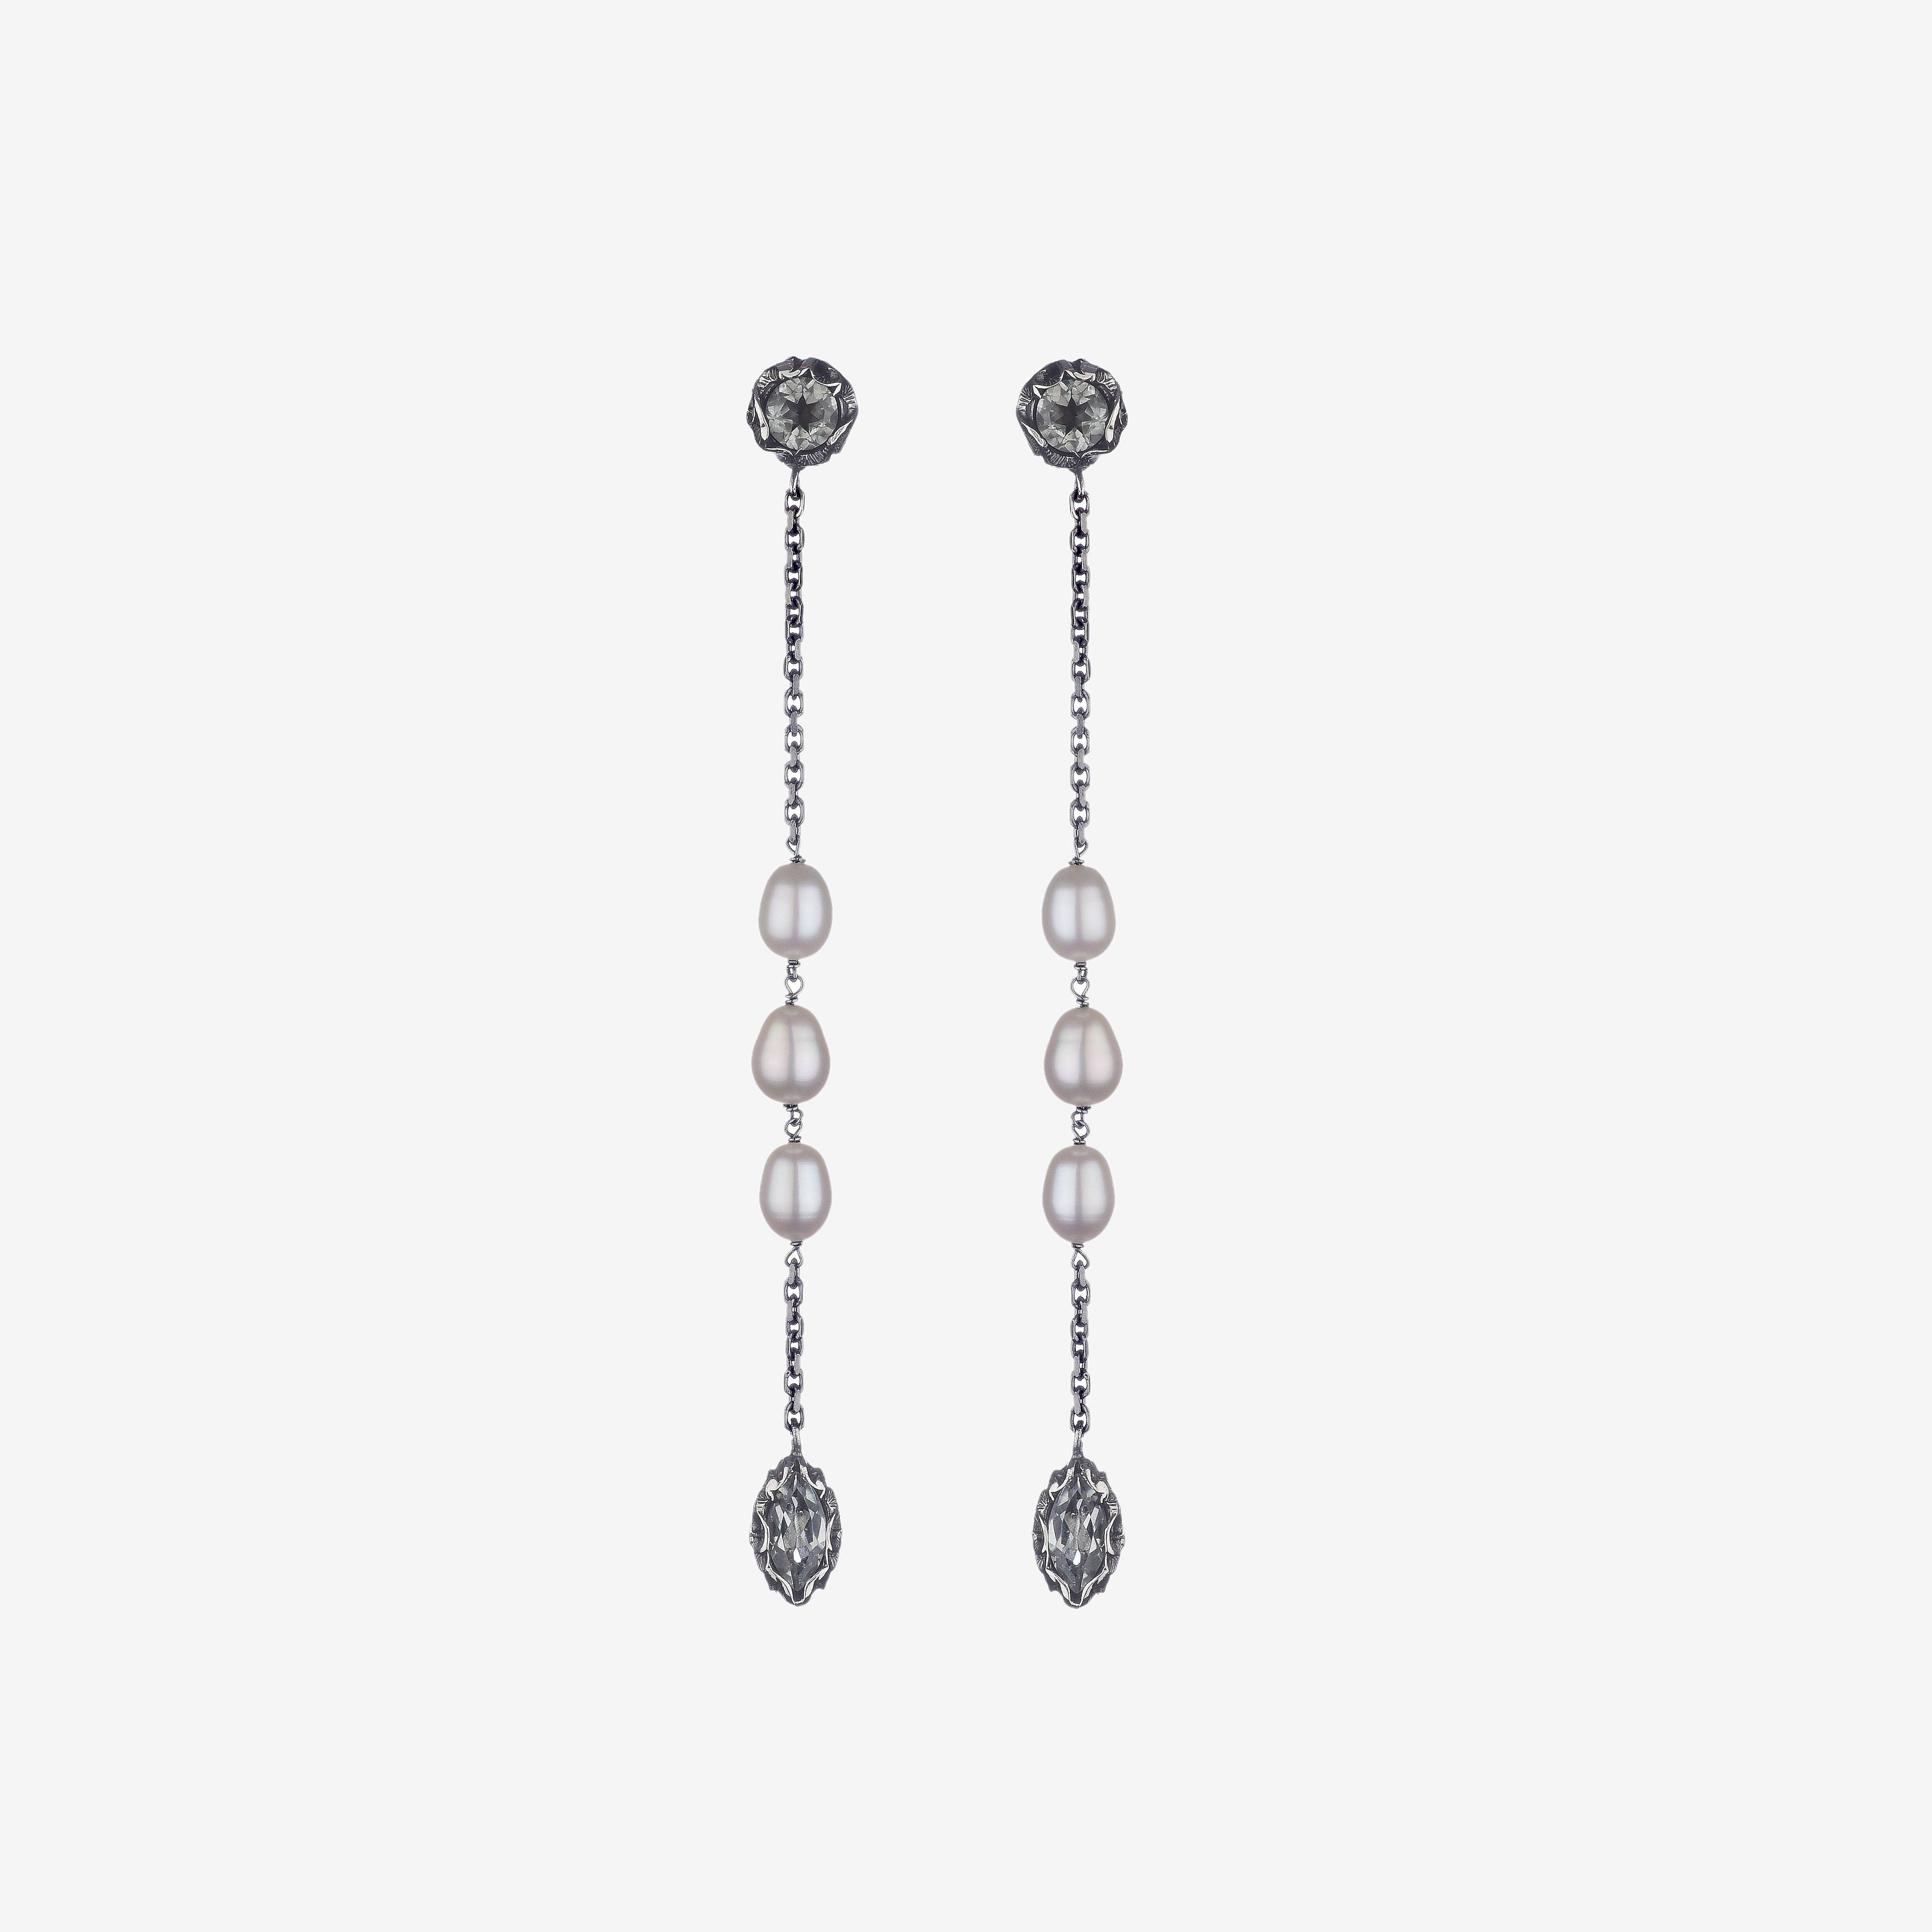 Pendant earring from the Pura collection with 3 pearls and 2 natural stones